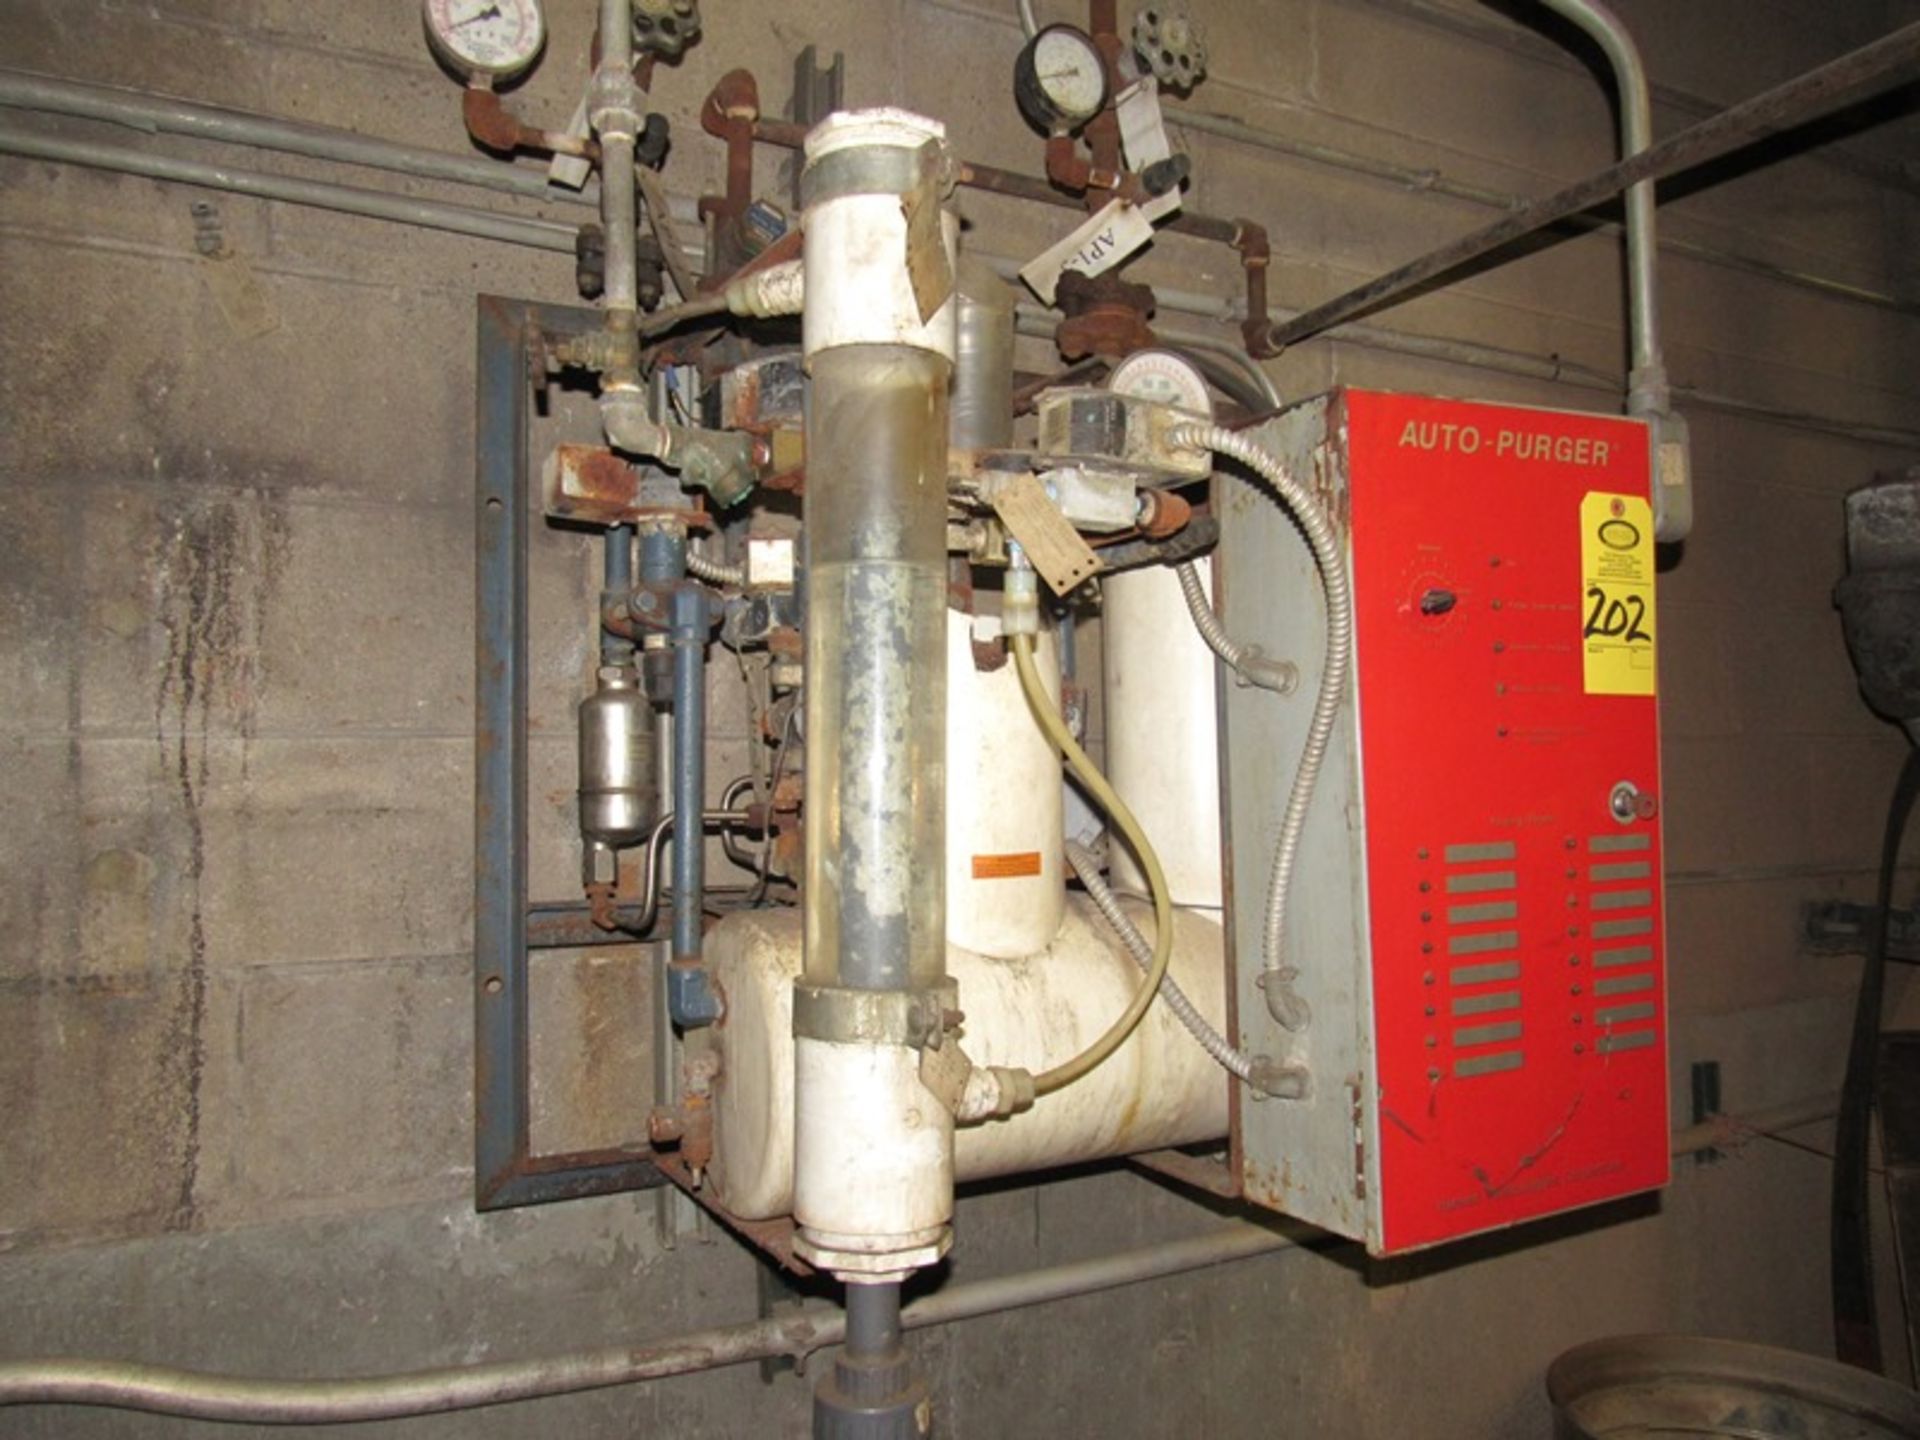 Hanson Mdl. AP16 Auto Purge, 115 volts, Ser. #14558 (Required Rigging Fee: $150 Contact Norm Pavlish - Image 2 of 3